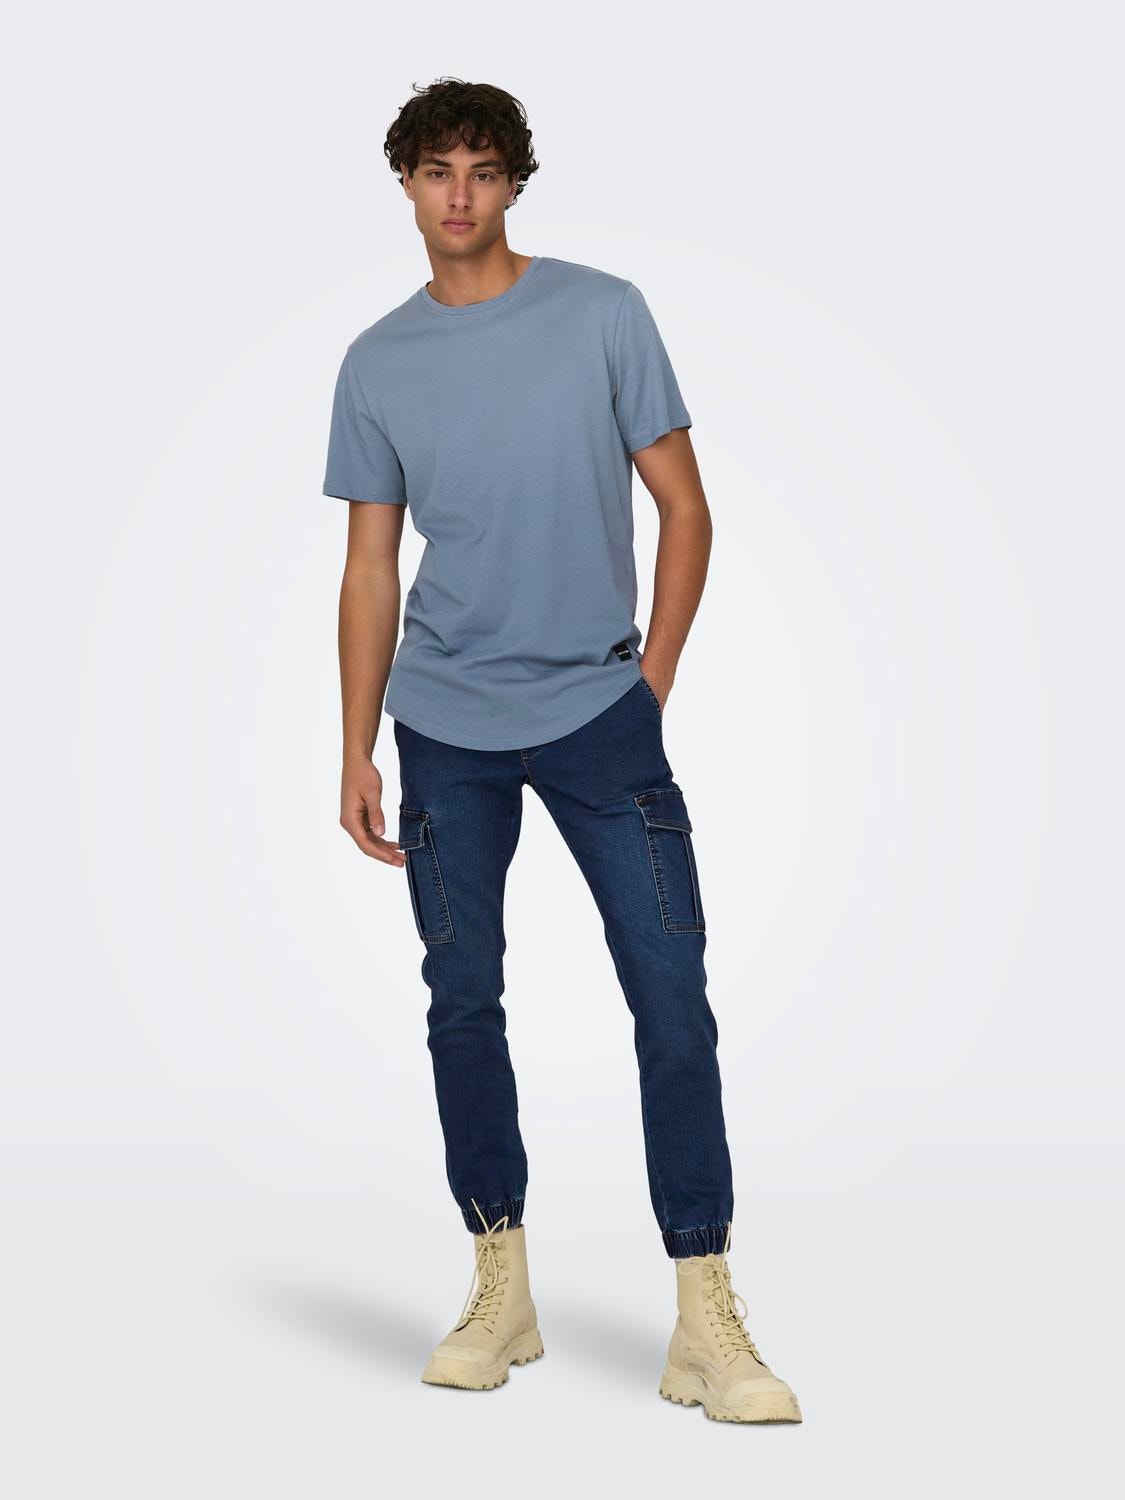 ONLY & SONS Long Line Fit O-hals T-skjorte -Flint Stone - 22002973